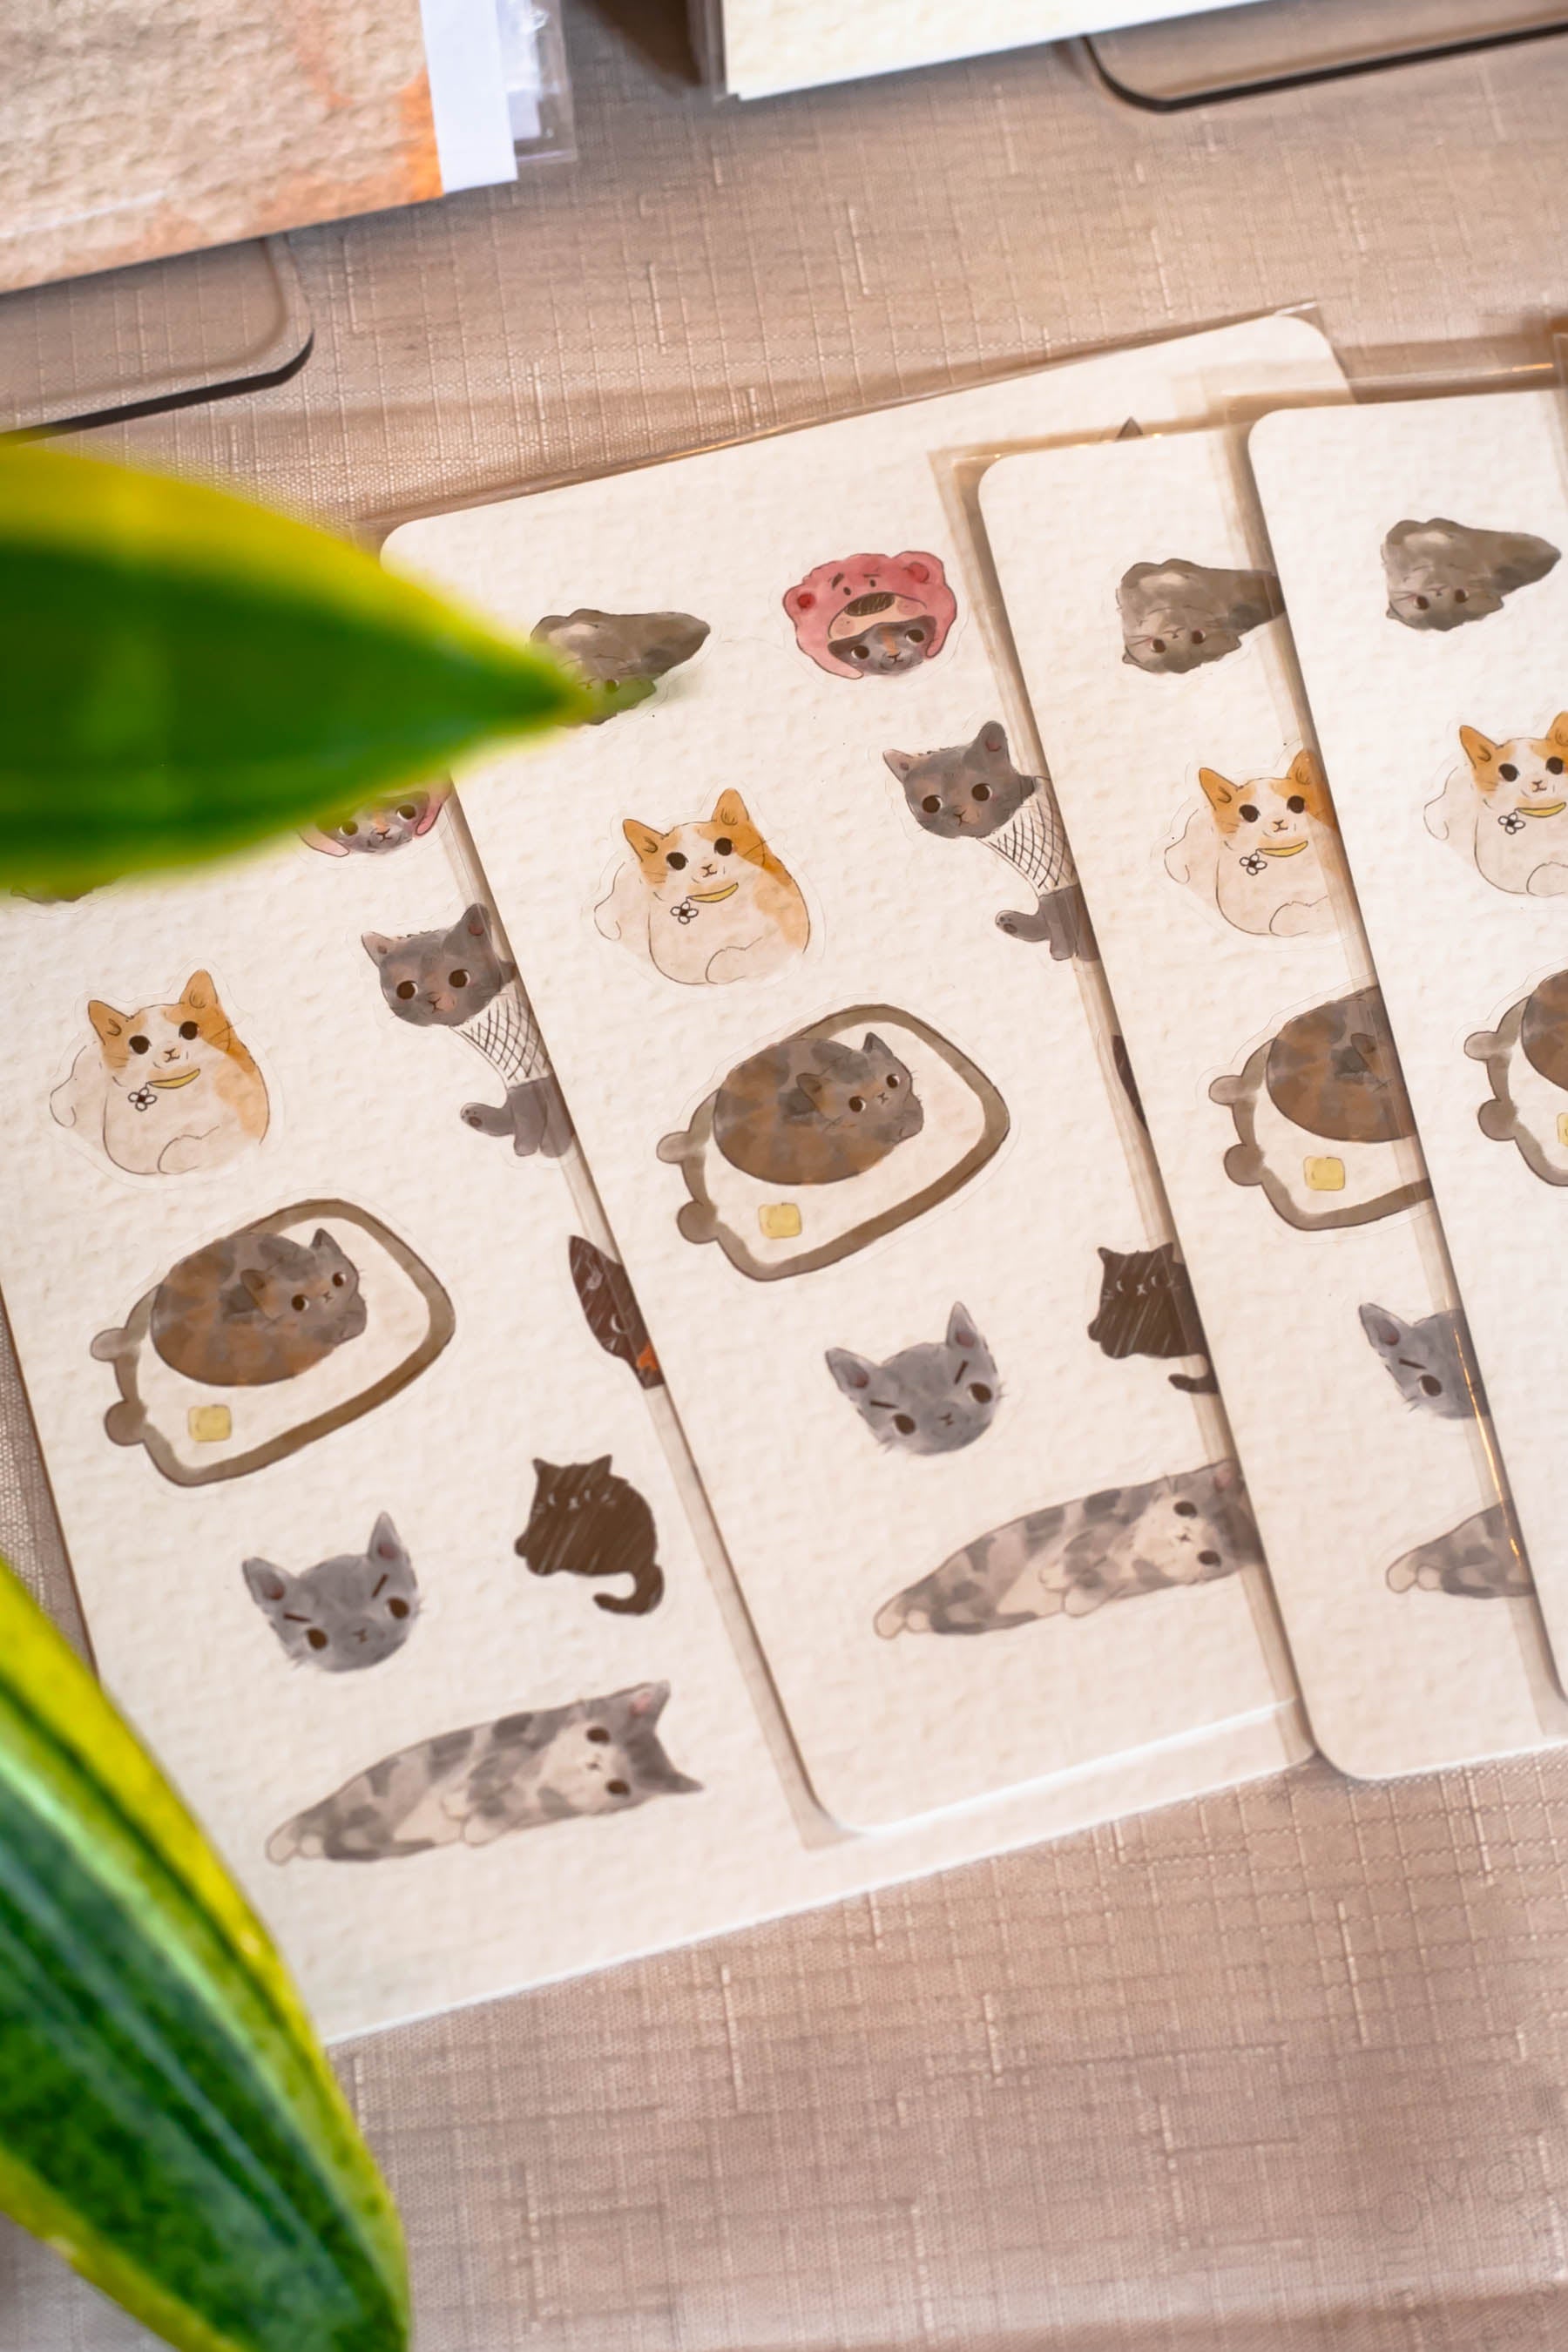 Hannah made sticker sheets of the CATS OF OMOI based on a collage of staff cat photos that sits right behind our counter. Did you get one?!